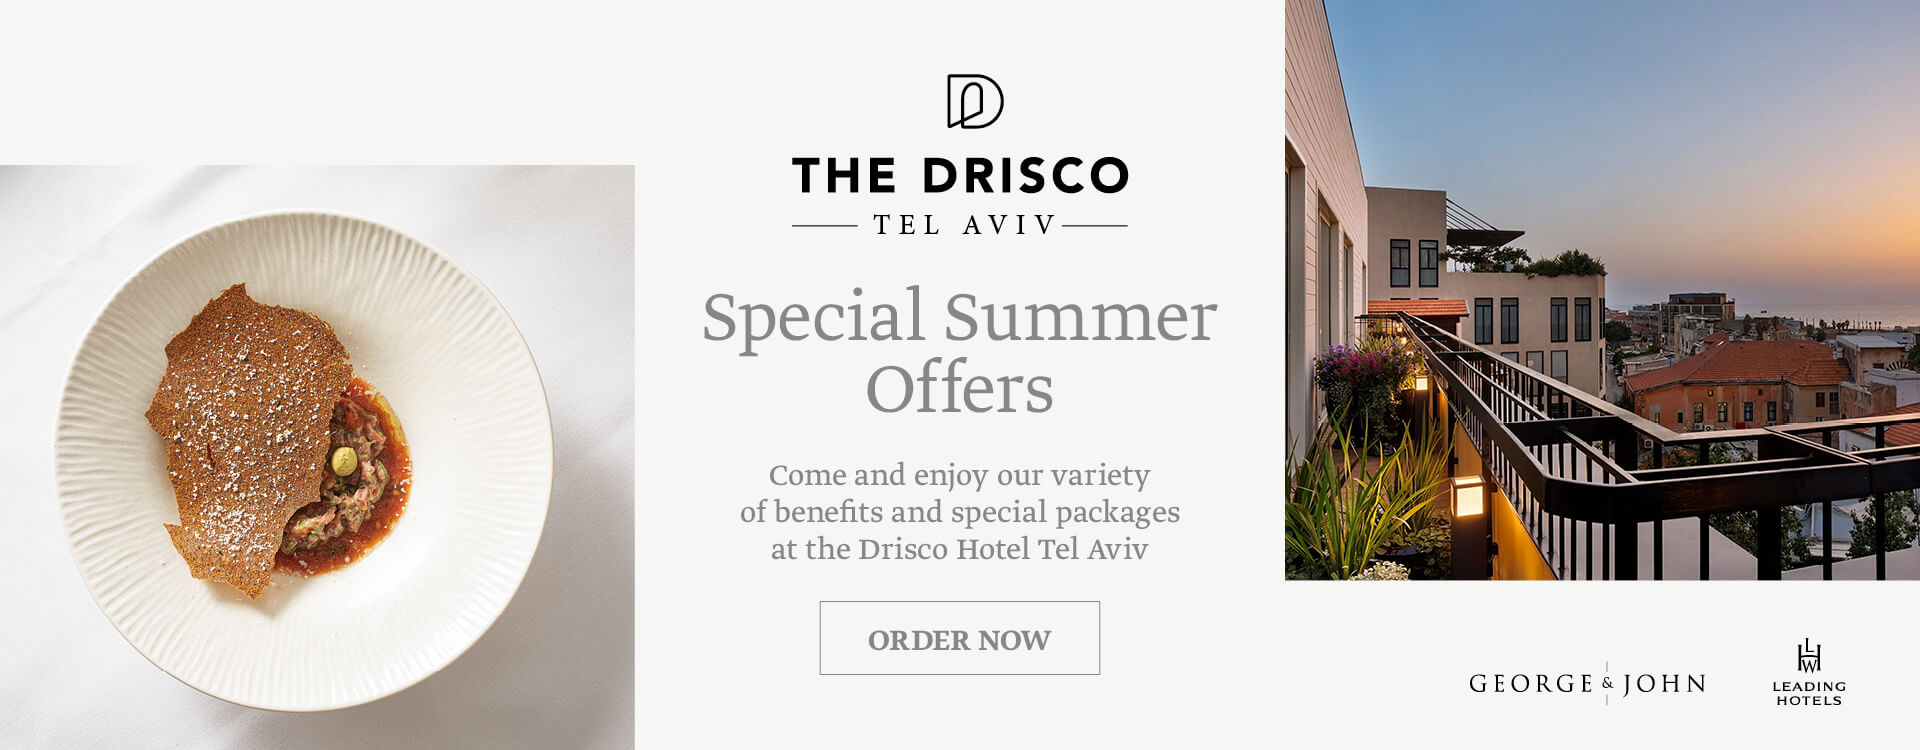 Special Summer Offers - The Drisco Hotel